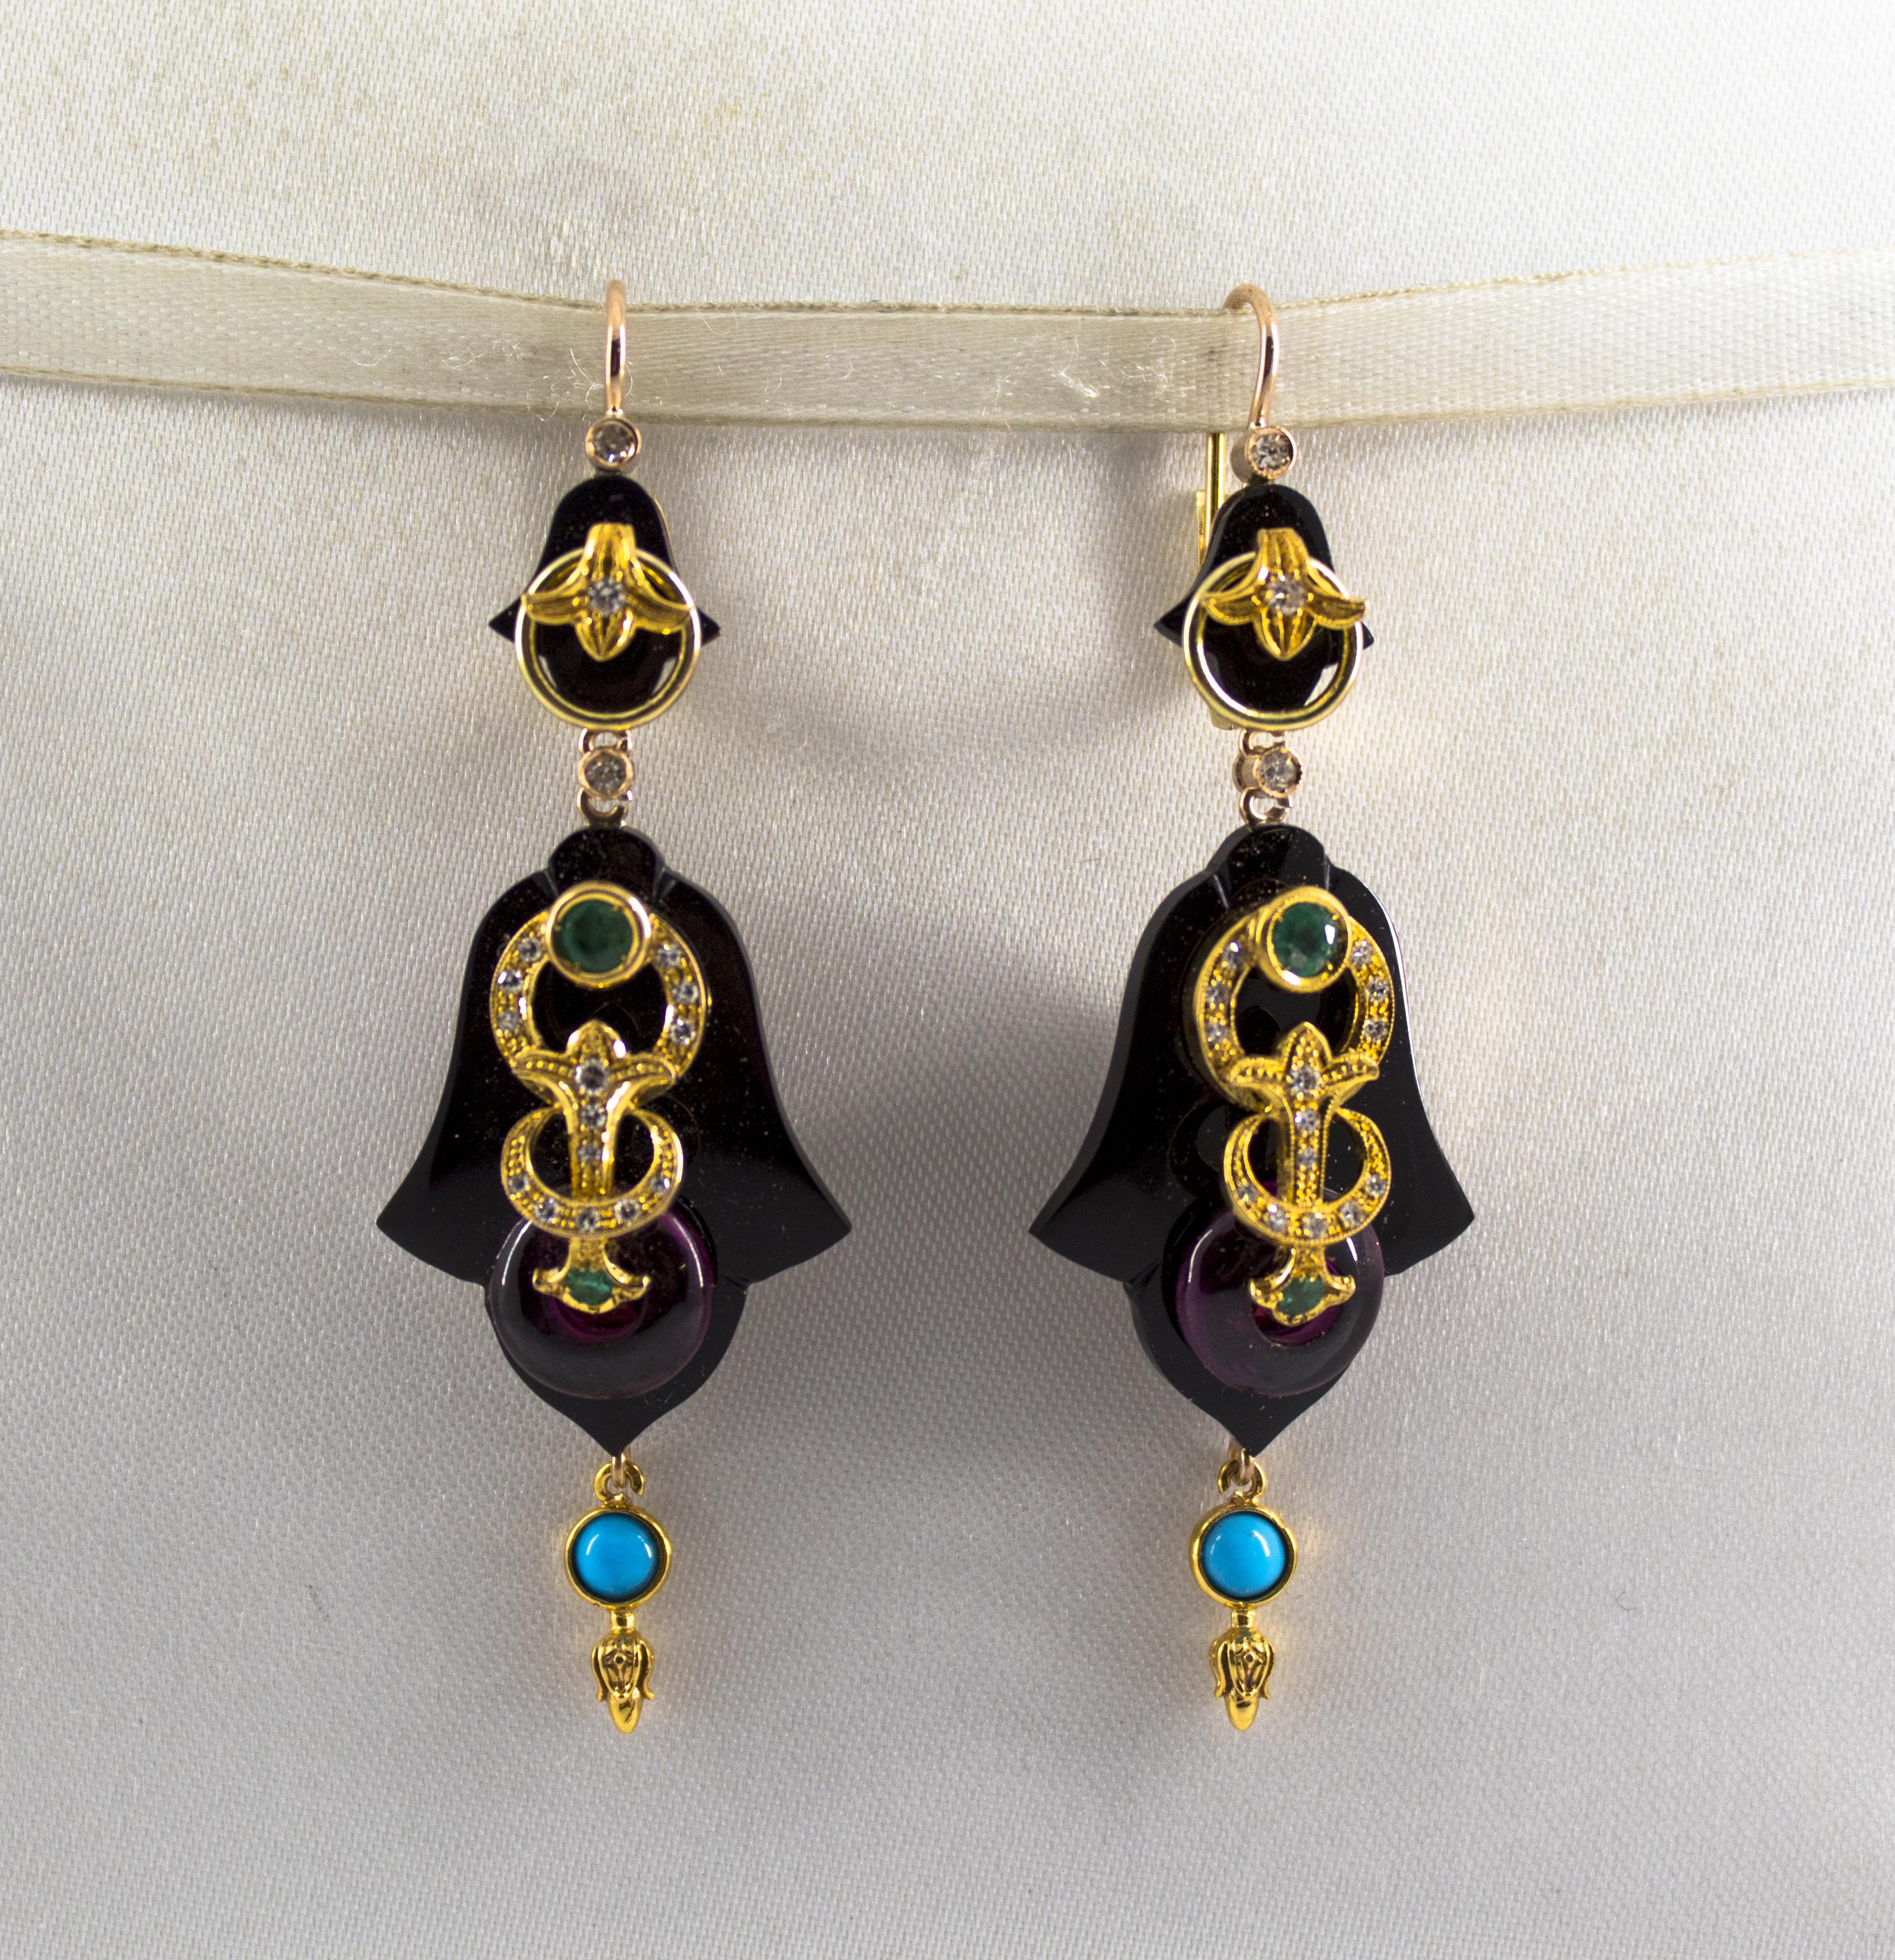 These Lever-Back Earrings are made of 14K Yellow Gold.
These Earrings have 0.42 Carats of White Diamonds.
These Earrings have 0.60 Carats of Emeralds.
These Earrings have also Onyx, Amethyst and Turquoise.
All our Earrings have pins for pierced ears